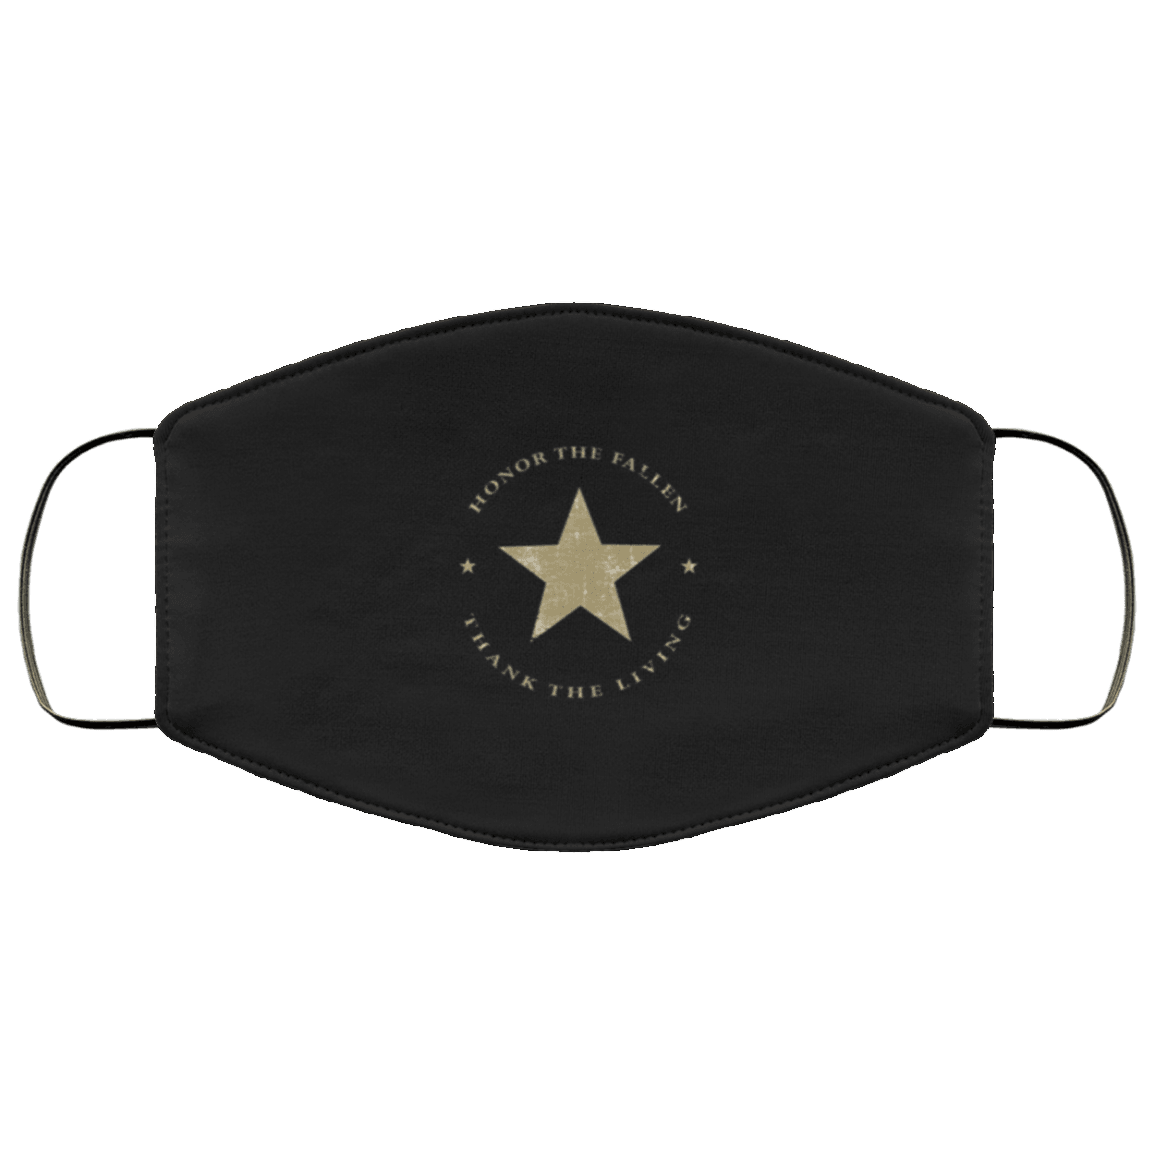 Designs by MyUtopia Shout Out:Honor The Fallen Thank The Living Star Adult Fabric Face Mask with Elastic Ear Loops,3 Layer Fabric Face Mask / Black / Adult,Fabric Face Mask